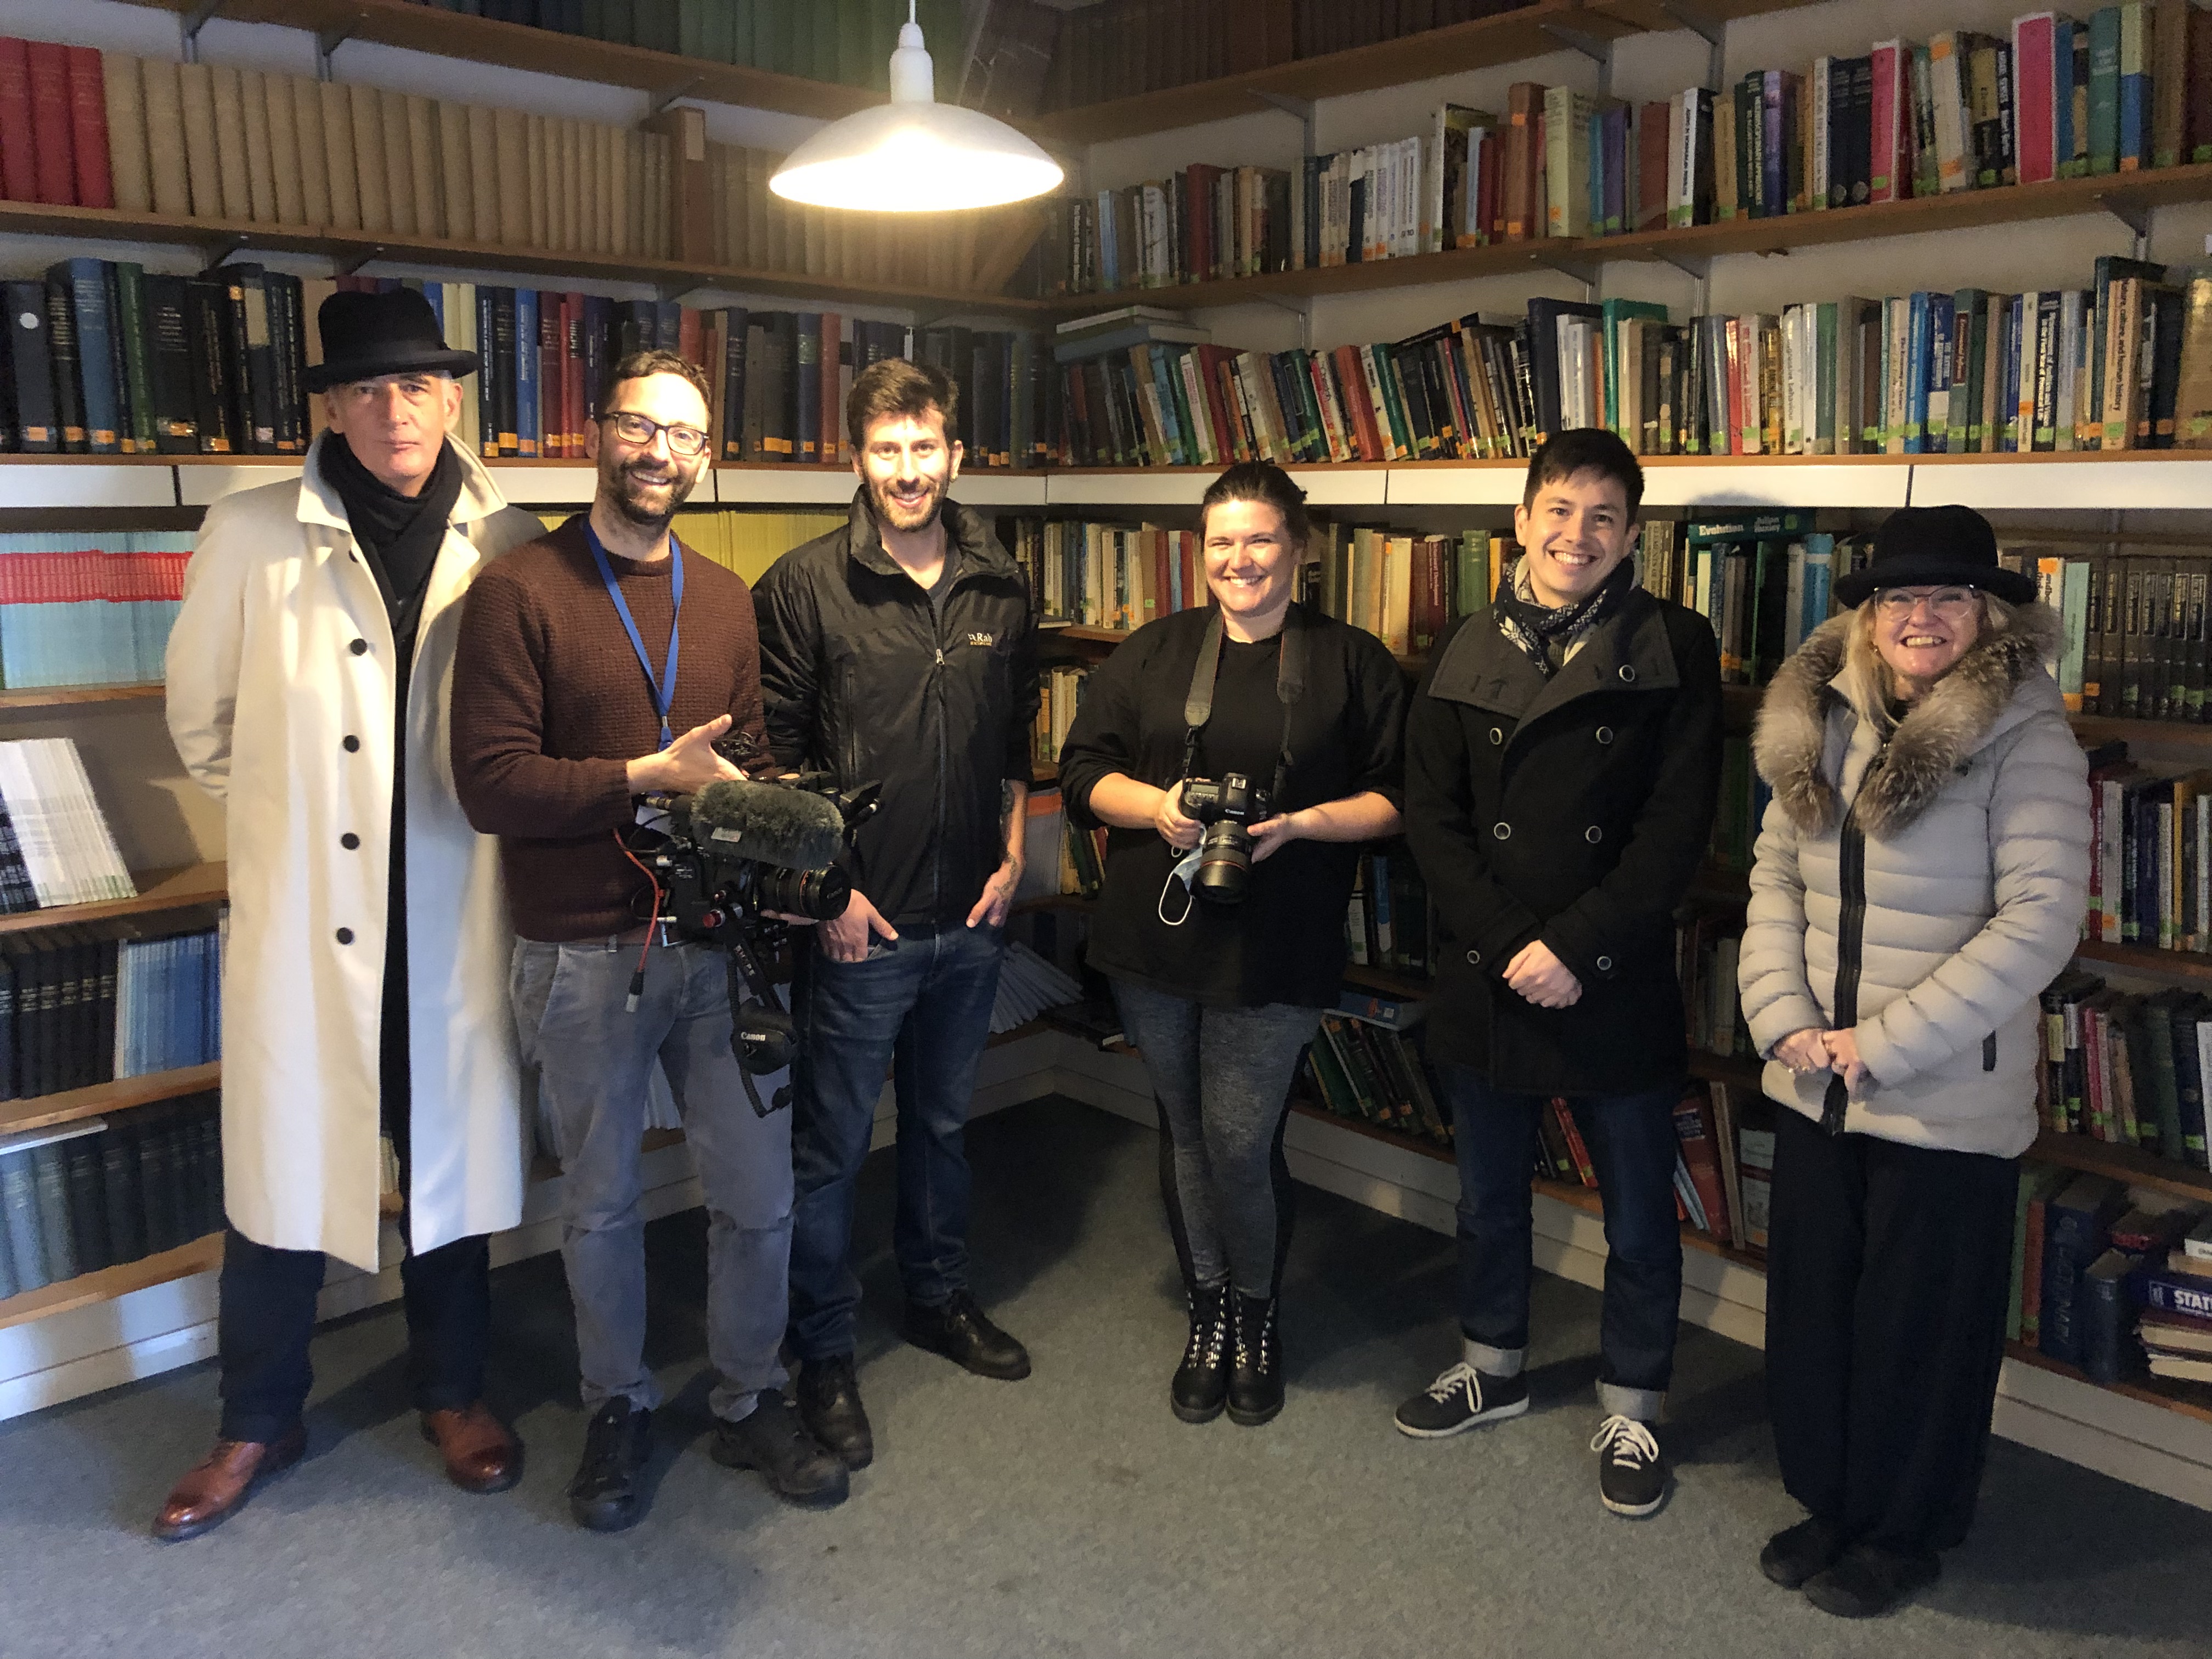 The team for the day. From left to right. Professor Clive Wilkins, David Stock, New Scientist, (Director of photography), Eli Garcia Pelegrin (lead author), Emily Baker, New Scientist, (Production director), Sam Wong, New Scientist, (Reporter and journali